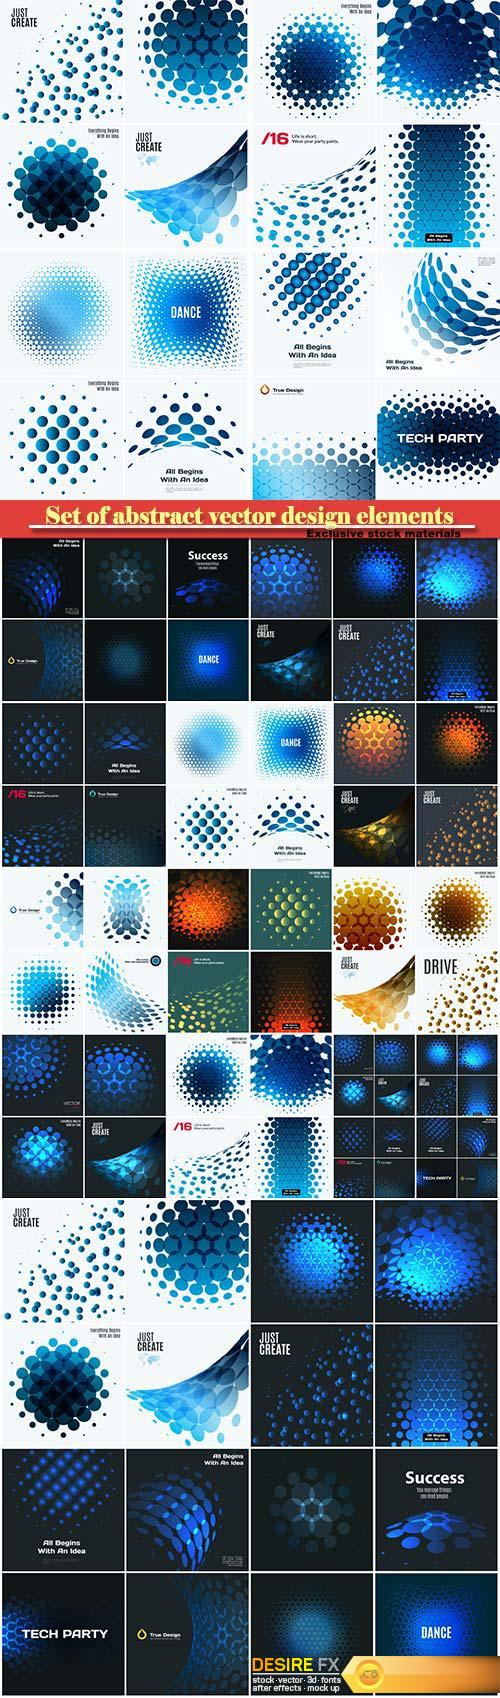 Set of abstract vector design elements for graphic layout, modern business template